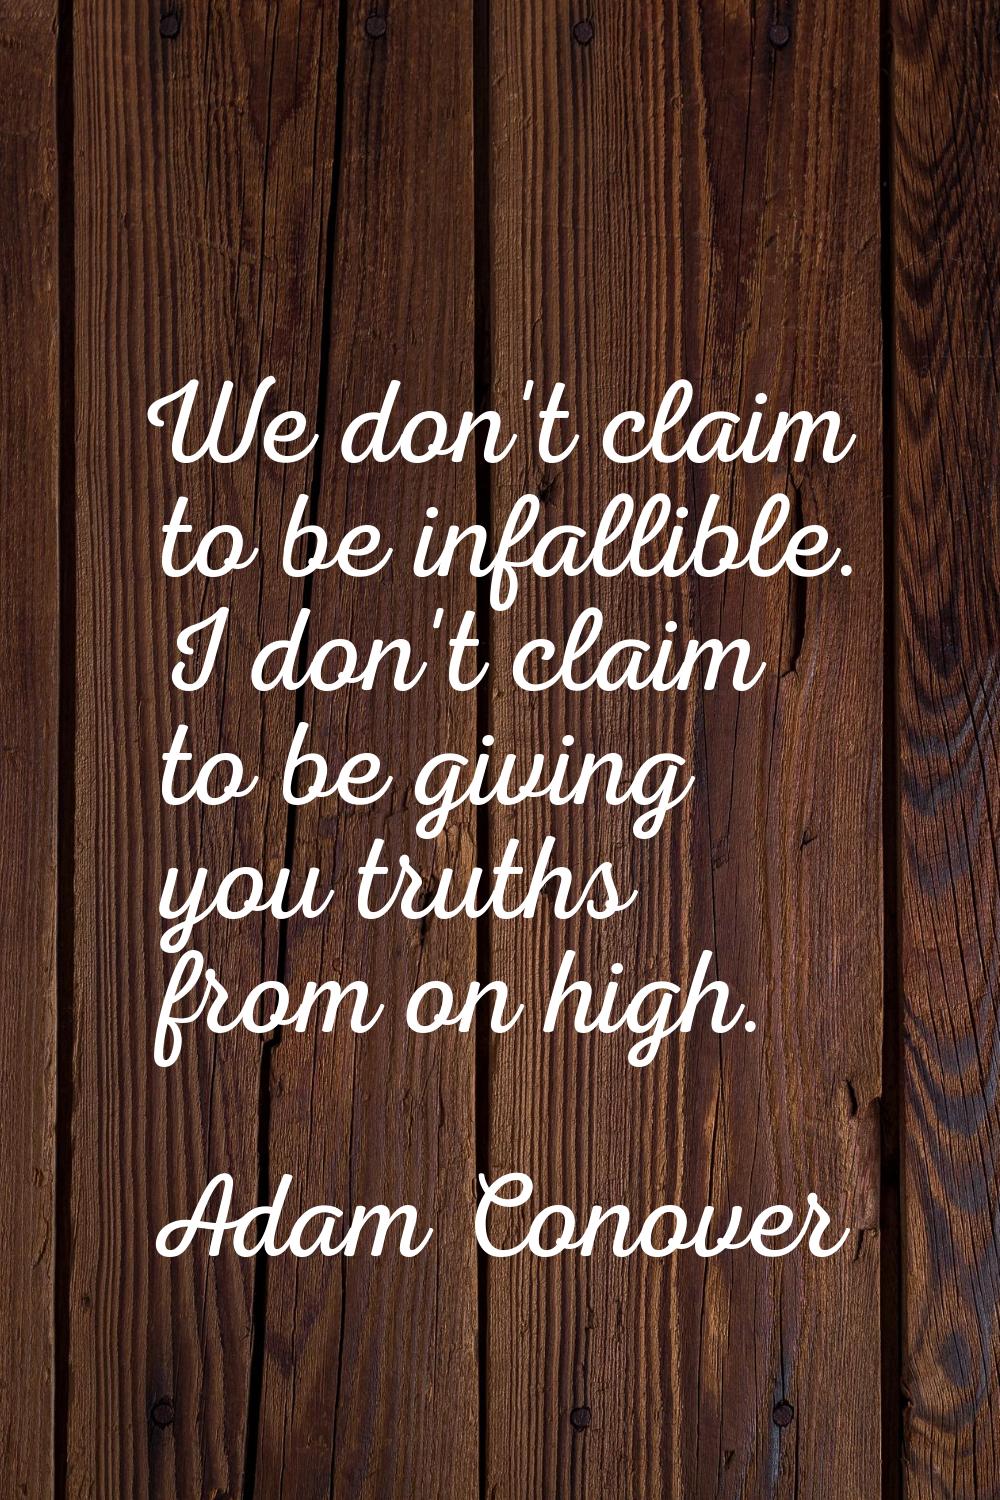 We don't claim to be infallible. I don't claim to be giving you truths from on high.